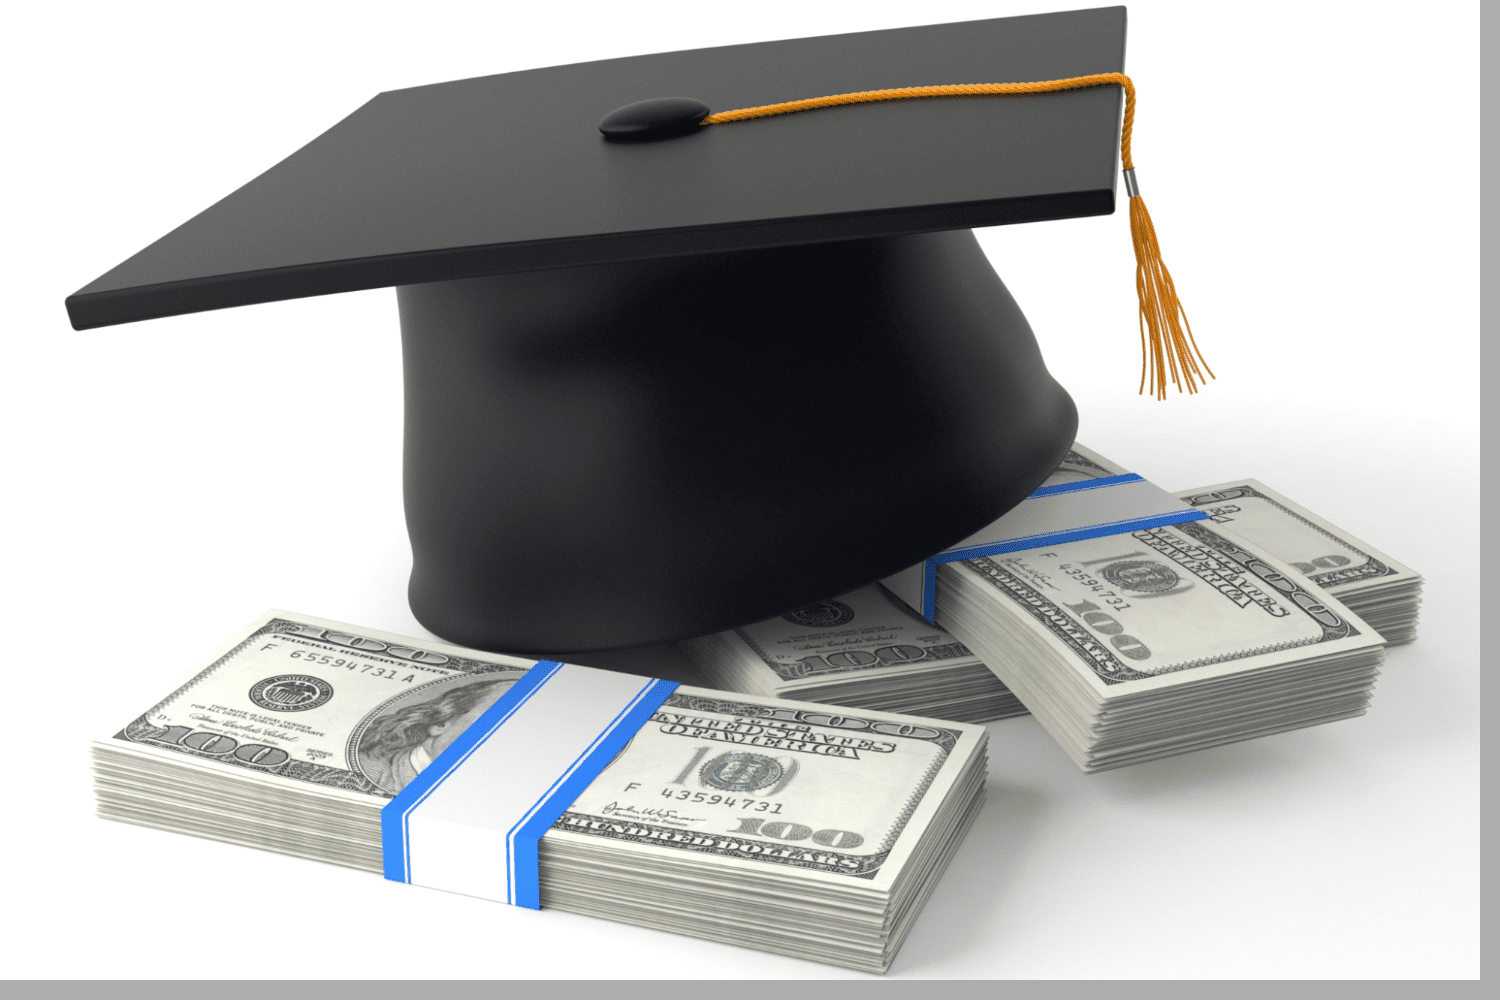 Student Loans: If You Are Looking To Succeed, Start With This Article